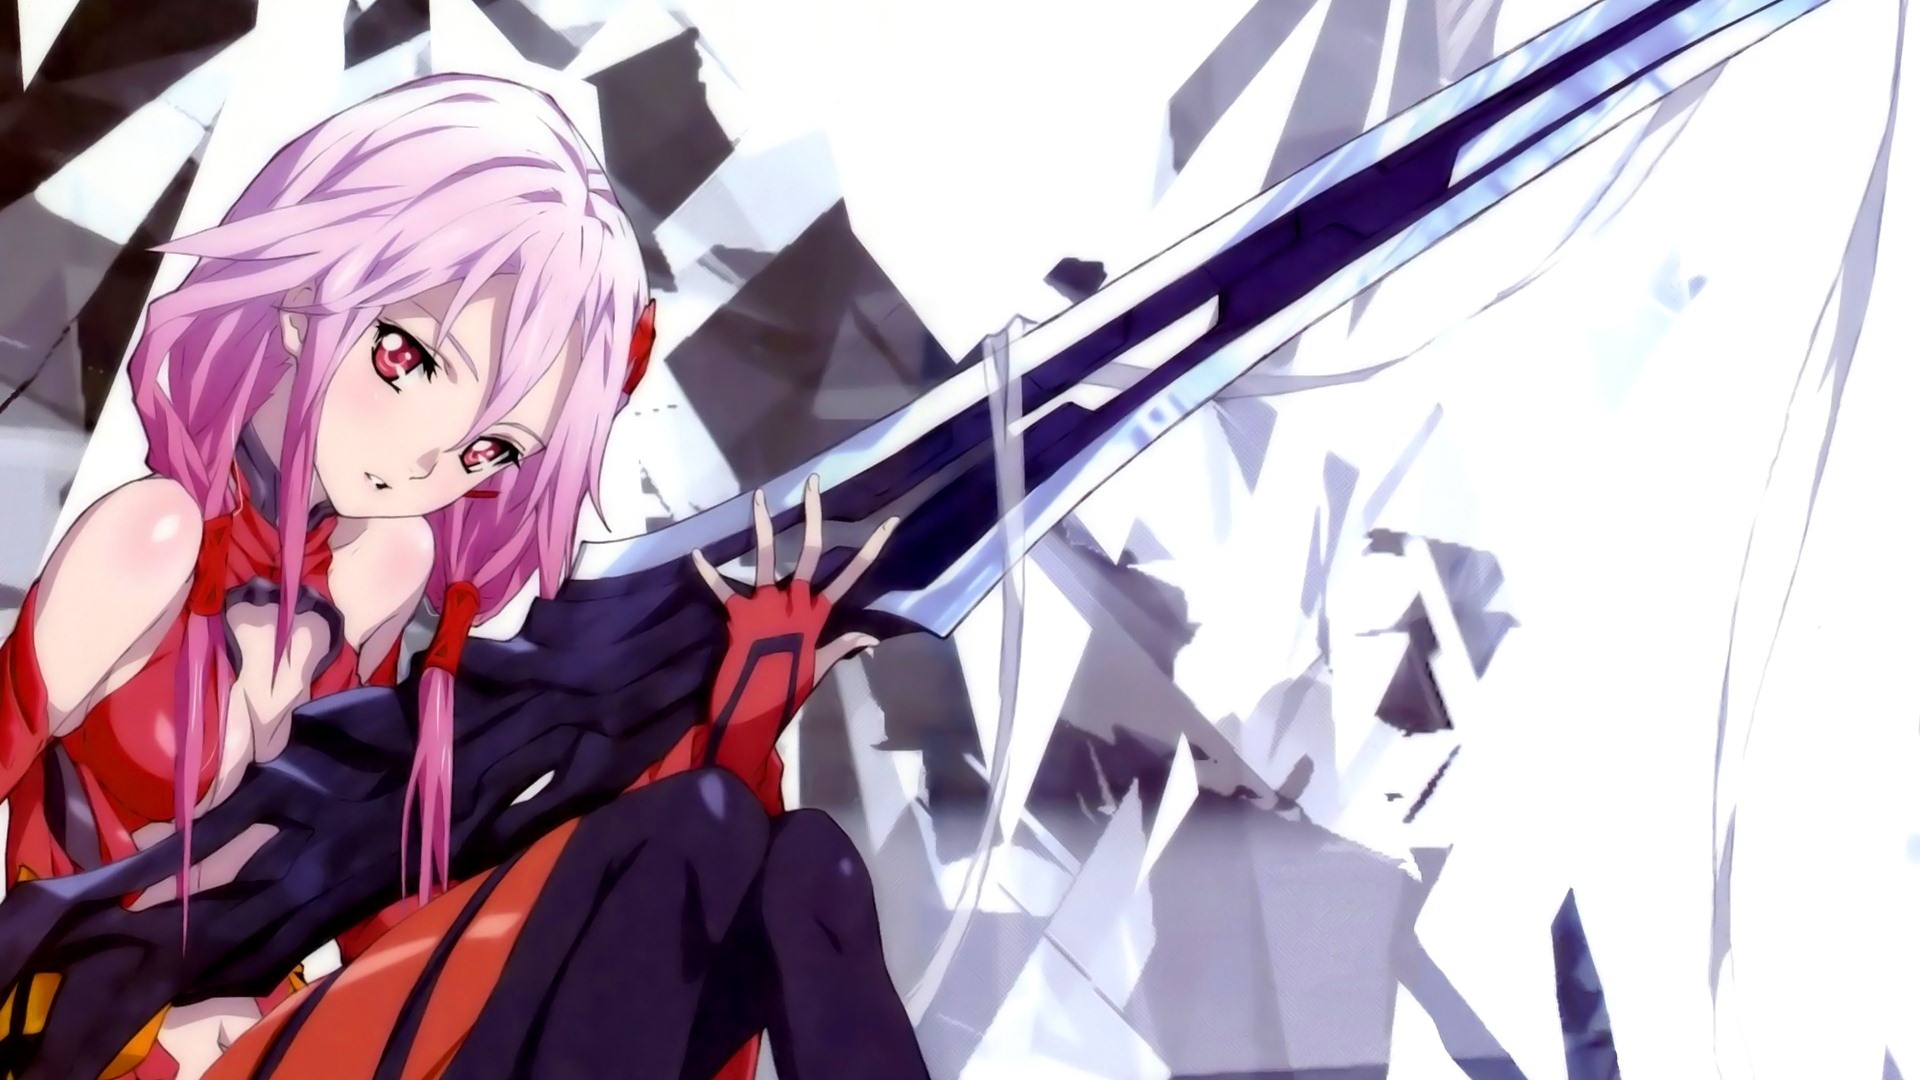 Free Download Guilty Crown Hd Wallpapers Anime Wallpaper Backgrounds Guilty Crown 19x1080 For Your Desktop Mobile Tablet Explore 46 Crown Wallpaper Wallcoverings Benjamin Moore Wallpaper Wallcovering Brick Wallpaper Wallcovering